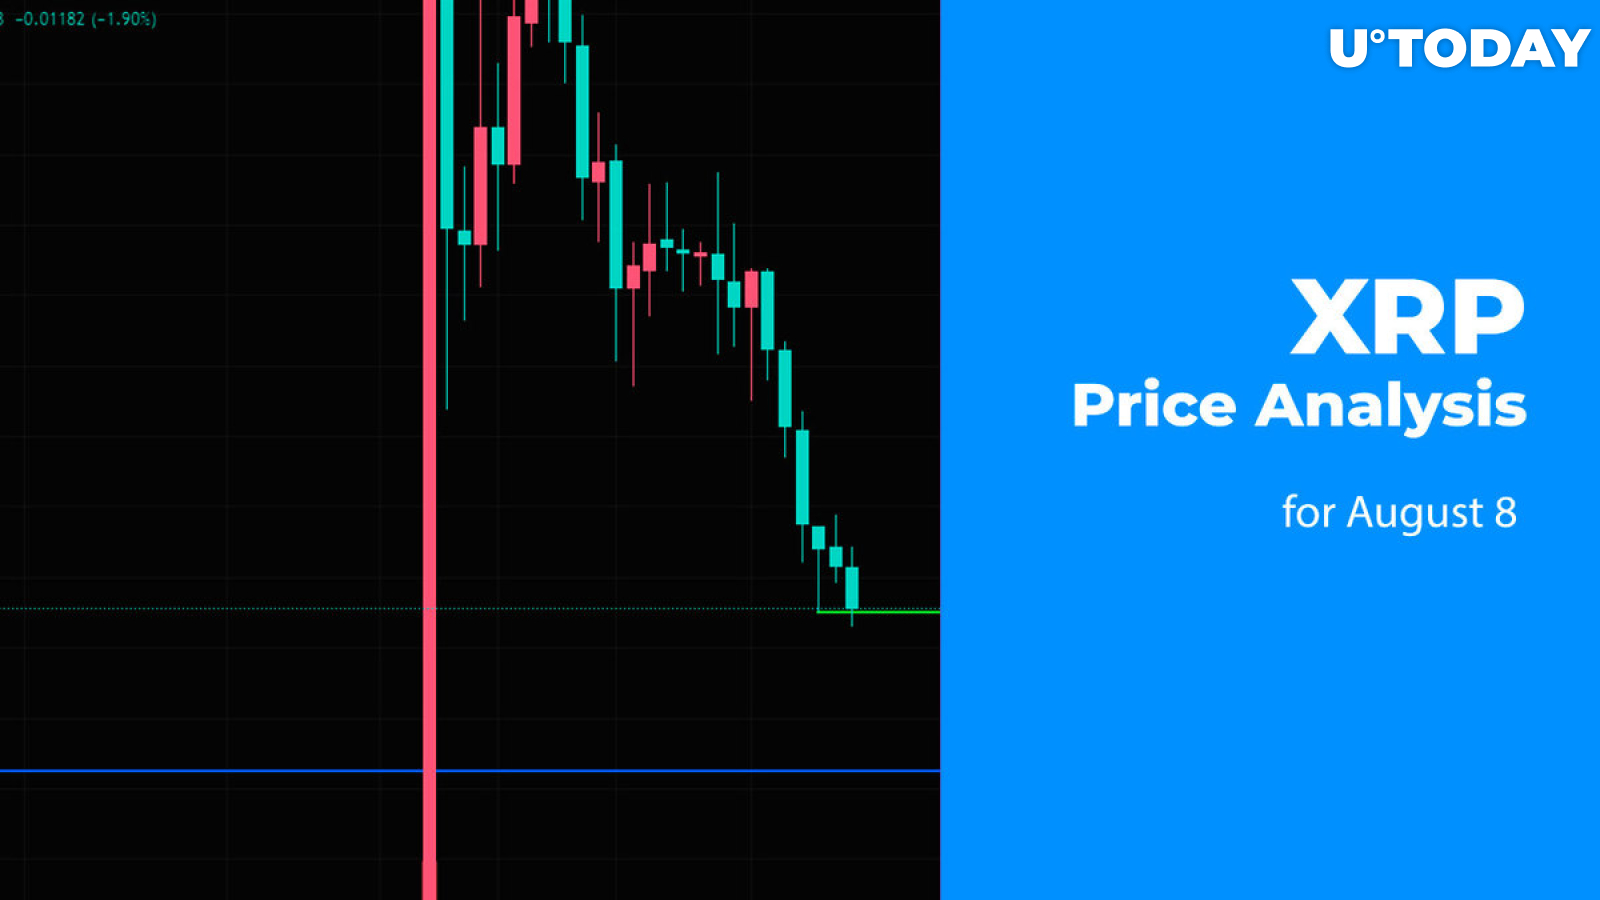 XRP Price Analysis for August 8